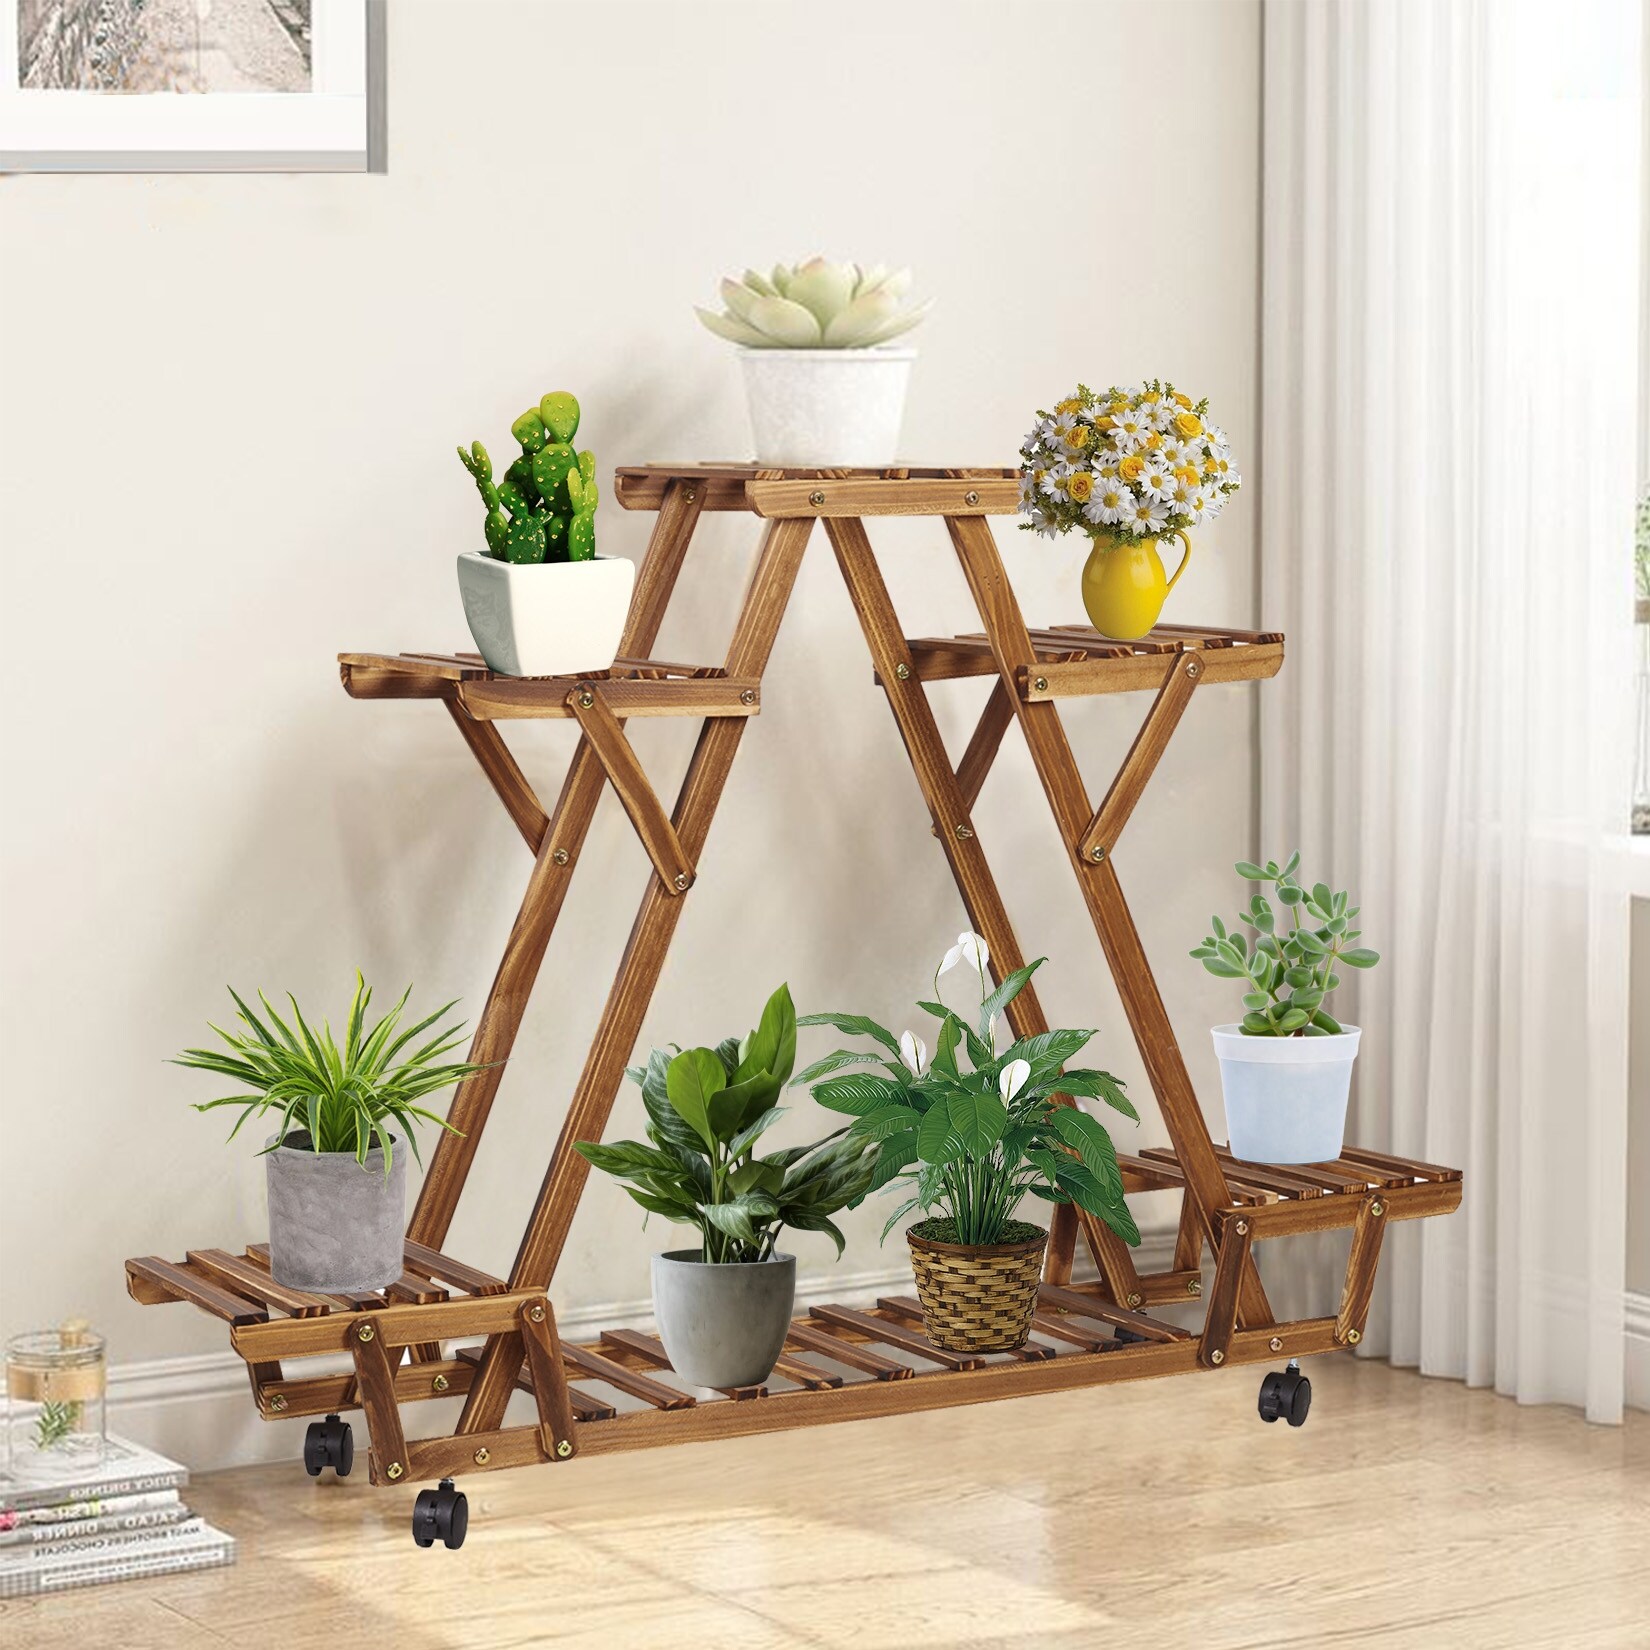 https://ak1.ostkcdn.com/images/products/is/images/direct/ea9f2355c6799940123c0795398b0cb6c1413752/Rectangular-Multi-Tiered-Plant-Stand-Rolling-Flower-Pot-Rack.jpg